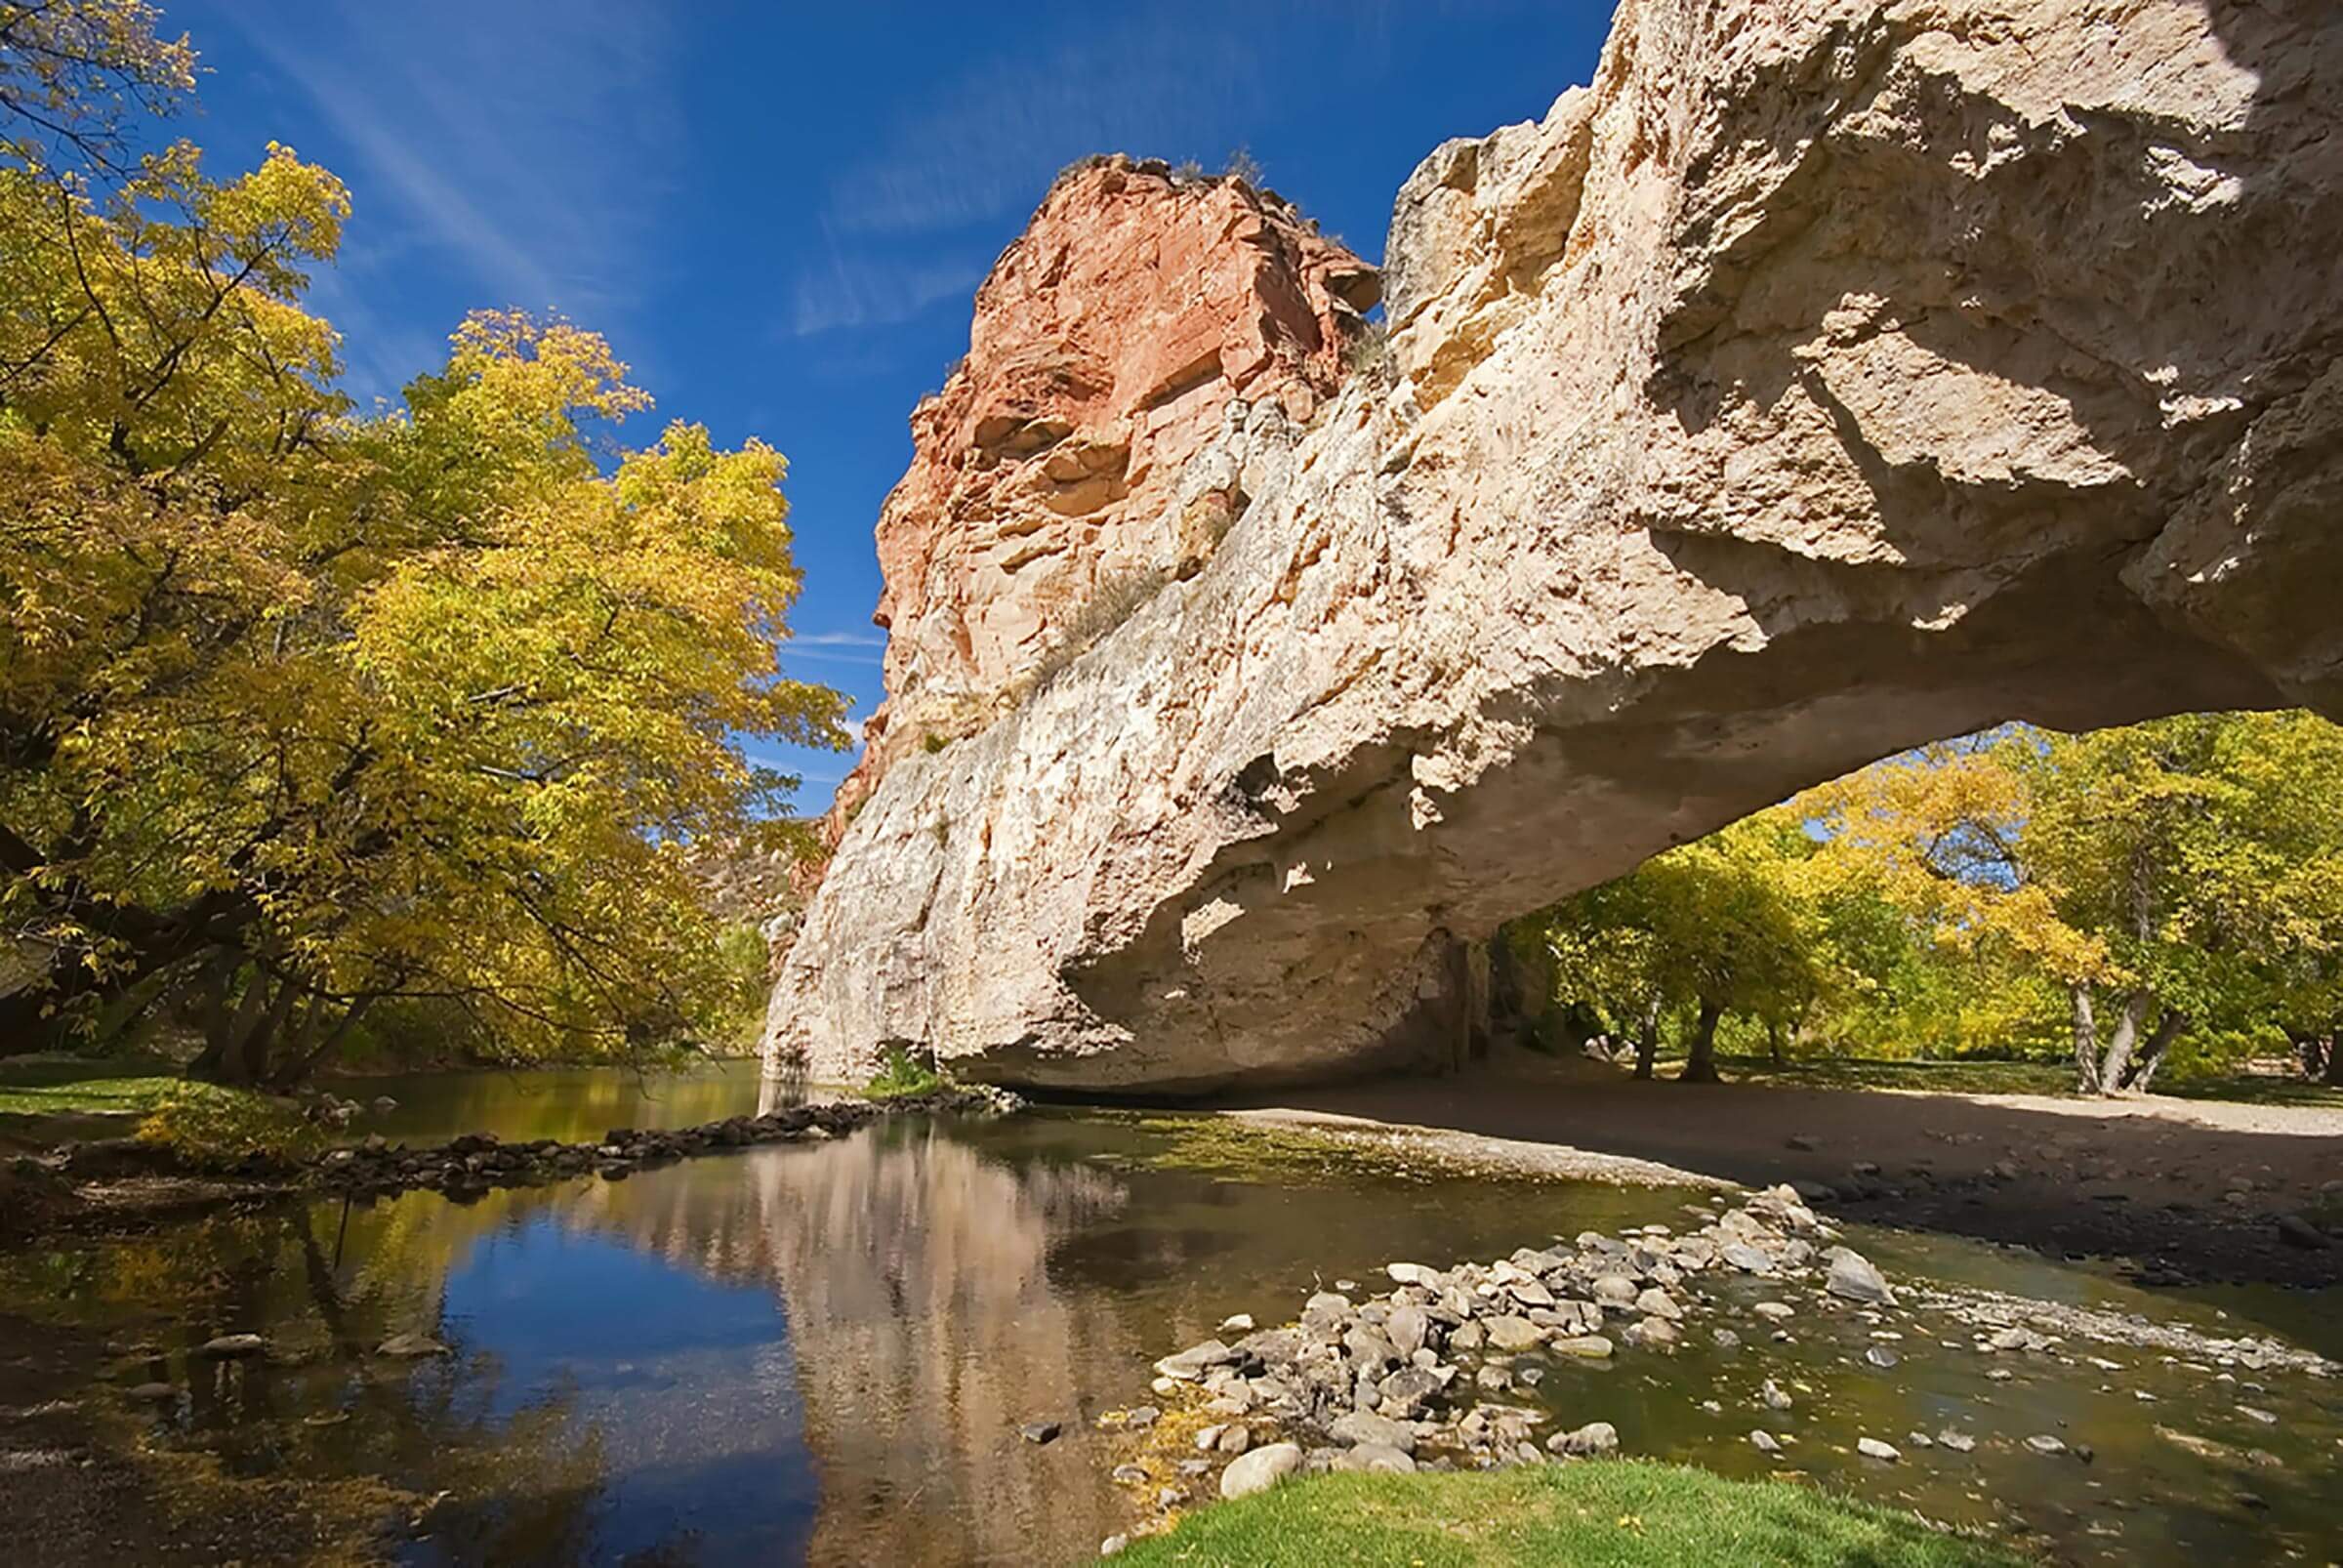 <p>"Some people might make the case that Wyoming itself is off the beaten path," says Jayme Sandberg of the American Heart Association, who used to live in the state. Sandberg wanted <em>Reader's Digest</em> to know about <a href="https://www.tripadvisor.com/Attraction_Review-g60452-d1086063-Reviews-Ayres_Natural_Bridge-Douglas_Wyoming.html" rel="noopener">Ayres Natural Bridge</a>, a place of natural beauty where over the course of millions of years, a creek wore away at a rock wall, carving out a natural bridge. Because it's challenging to access (unless you're adept at driving on dirt roads and narrow paths), it's a hidden gem whose visitors tend to be locals with picnic lunches.</p> <p class="listicle-page__cta-button-shop"><a class="shop-btn" href="https://www.tripadvisor.com/Attraction_Review-g60452-d1086063-Reviews-Ayres_Natural_Bridge-Douglas_Wyoming.html">Learn More</a></p> <p><em>Additional reporting by Lauren Cahn</em>.</p> <p><strong>Sources:</strong></p> <ul> <li><a href="https://www.californiabeaches.com/beach/black-sands-beach-marin-headlands/" rel="noopener">California Beaches</a>: "Black Sands Beach"</li> <li><a href="https://www.atlasobscura.com/places/harry-andrews-chateau-laroche" rel="noopener">Atlas Obscura</a>: "Harry Andrews' Chateau Laroche"</li> <li><a href="https://www.funinfairfaxva.com/20-northern-virginia-hidden-gems/" rel="noopener">Fun in Fairfax</a>: "20 Must-See Northern Virginia Hidden Gems Rich in Nature and History"</li> </ul>